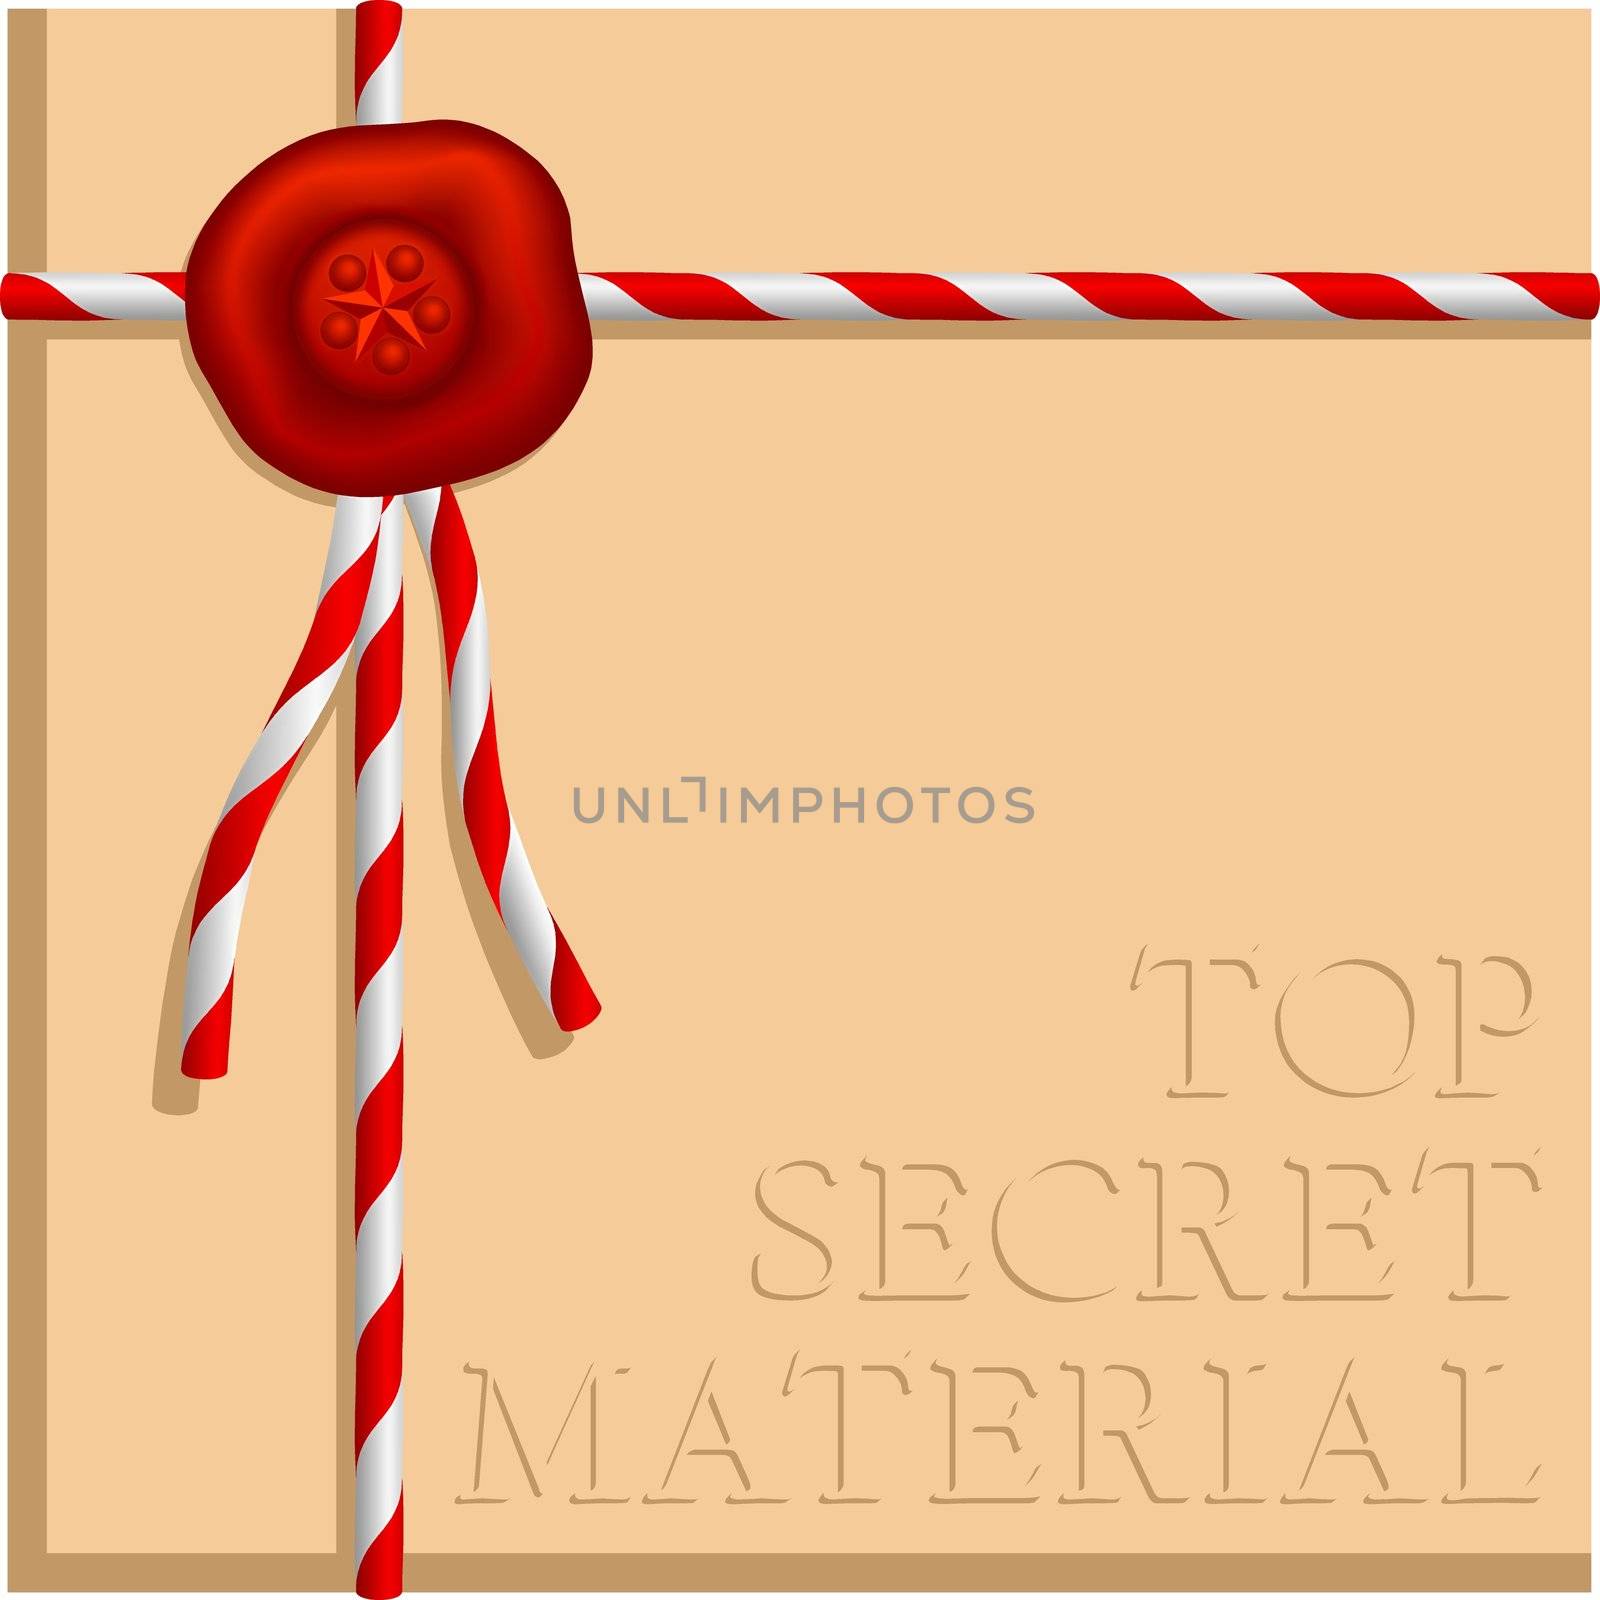 Retro style illustration from an archieve: Filed and sealed documents or records in brown paper wrapping with an oldfashioned wax seal and authentic looking document string spun of red and white thread, and the text "Top Secret Material" embossed in the surface of the brown paper. It is very easy to remove the words and replace it with your own message if you want another text. The free space left after removal of the embossed words can be used for your photo or illustration as well as for an alternative text.